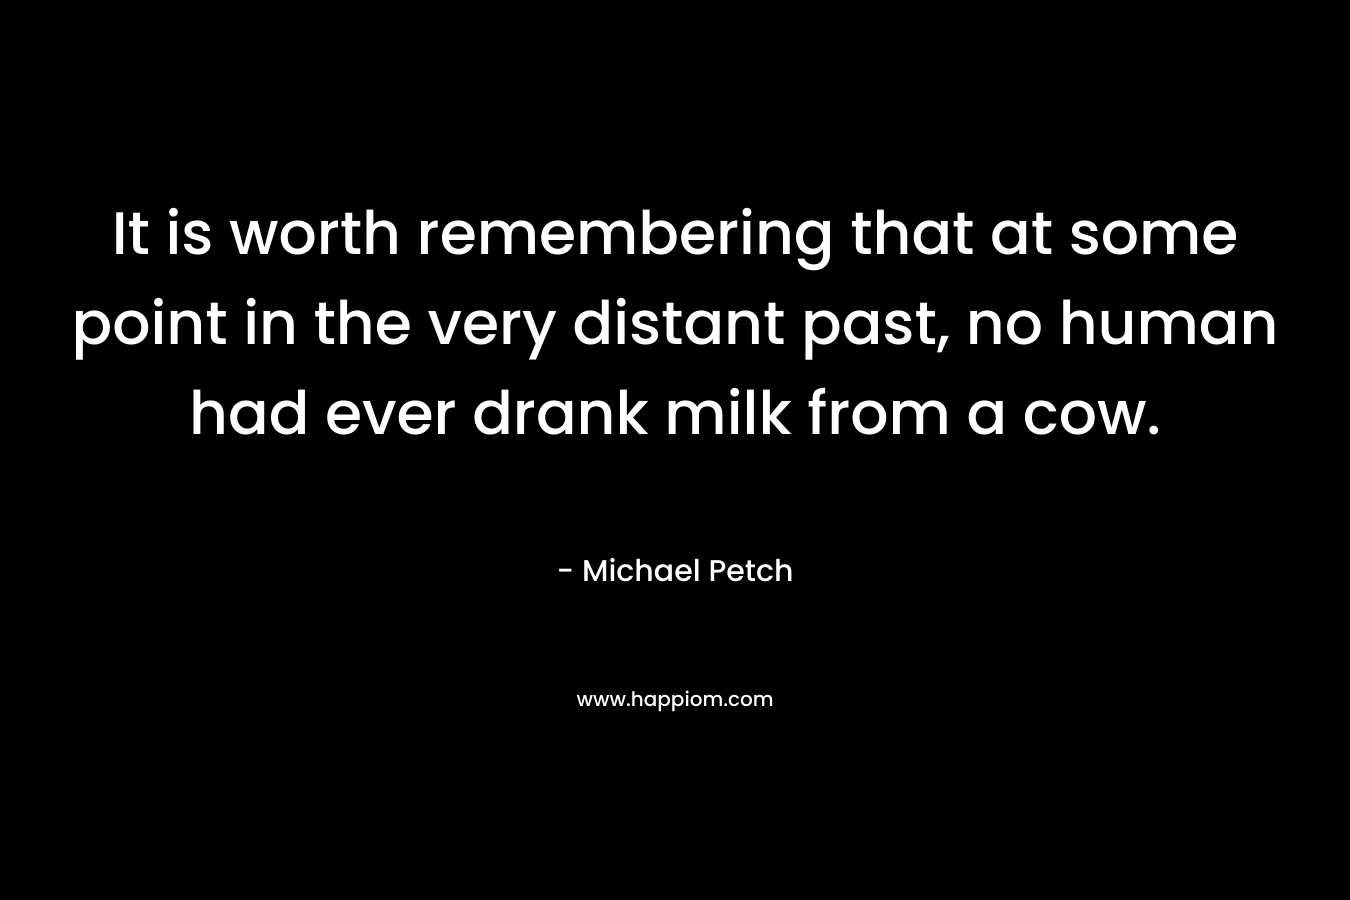 It is worth remembering that at some point in the very distant past, no human had ever drank milk from a cow. – Michael Petch